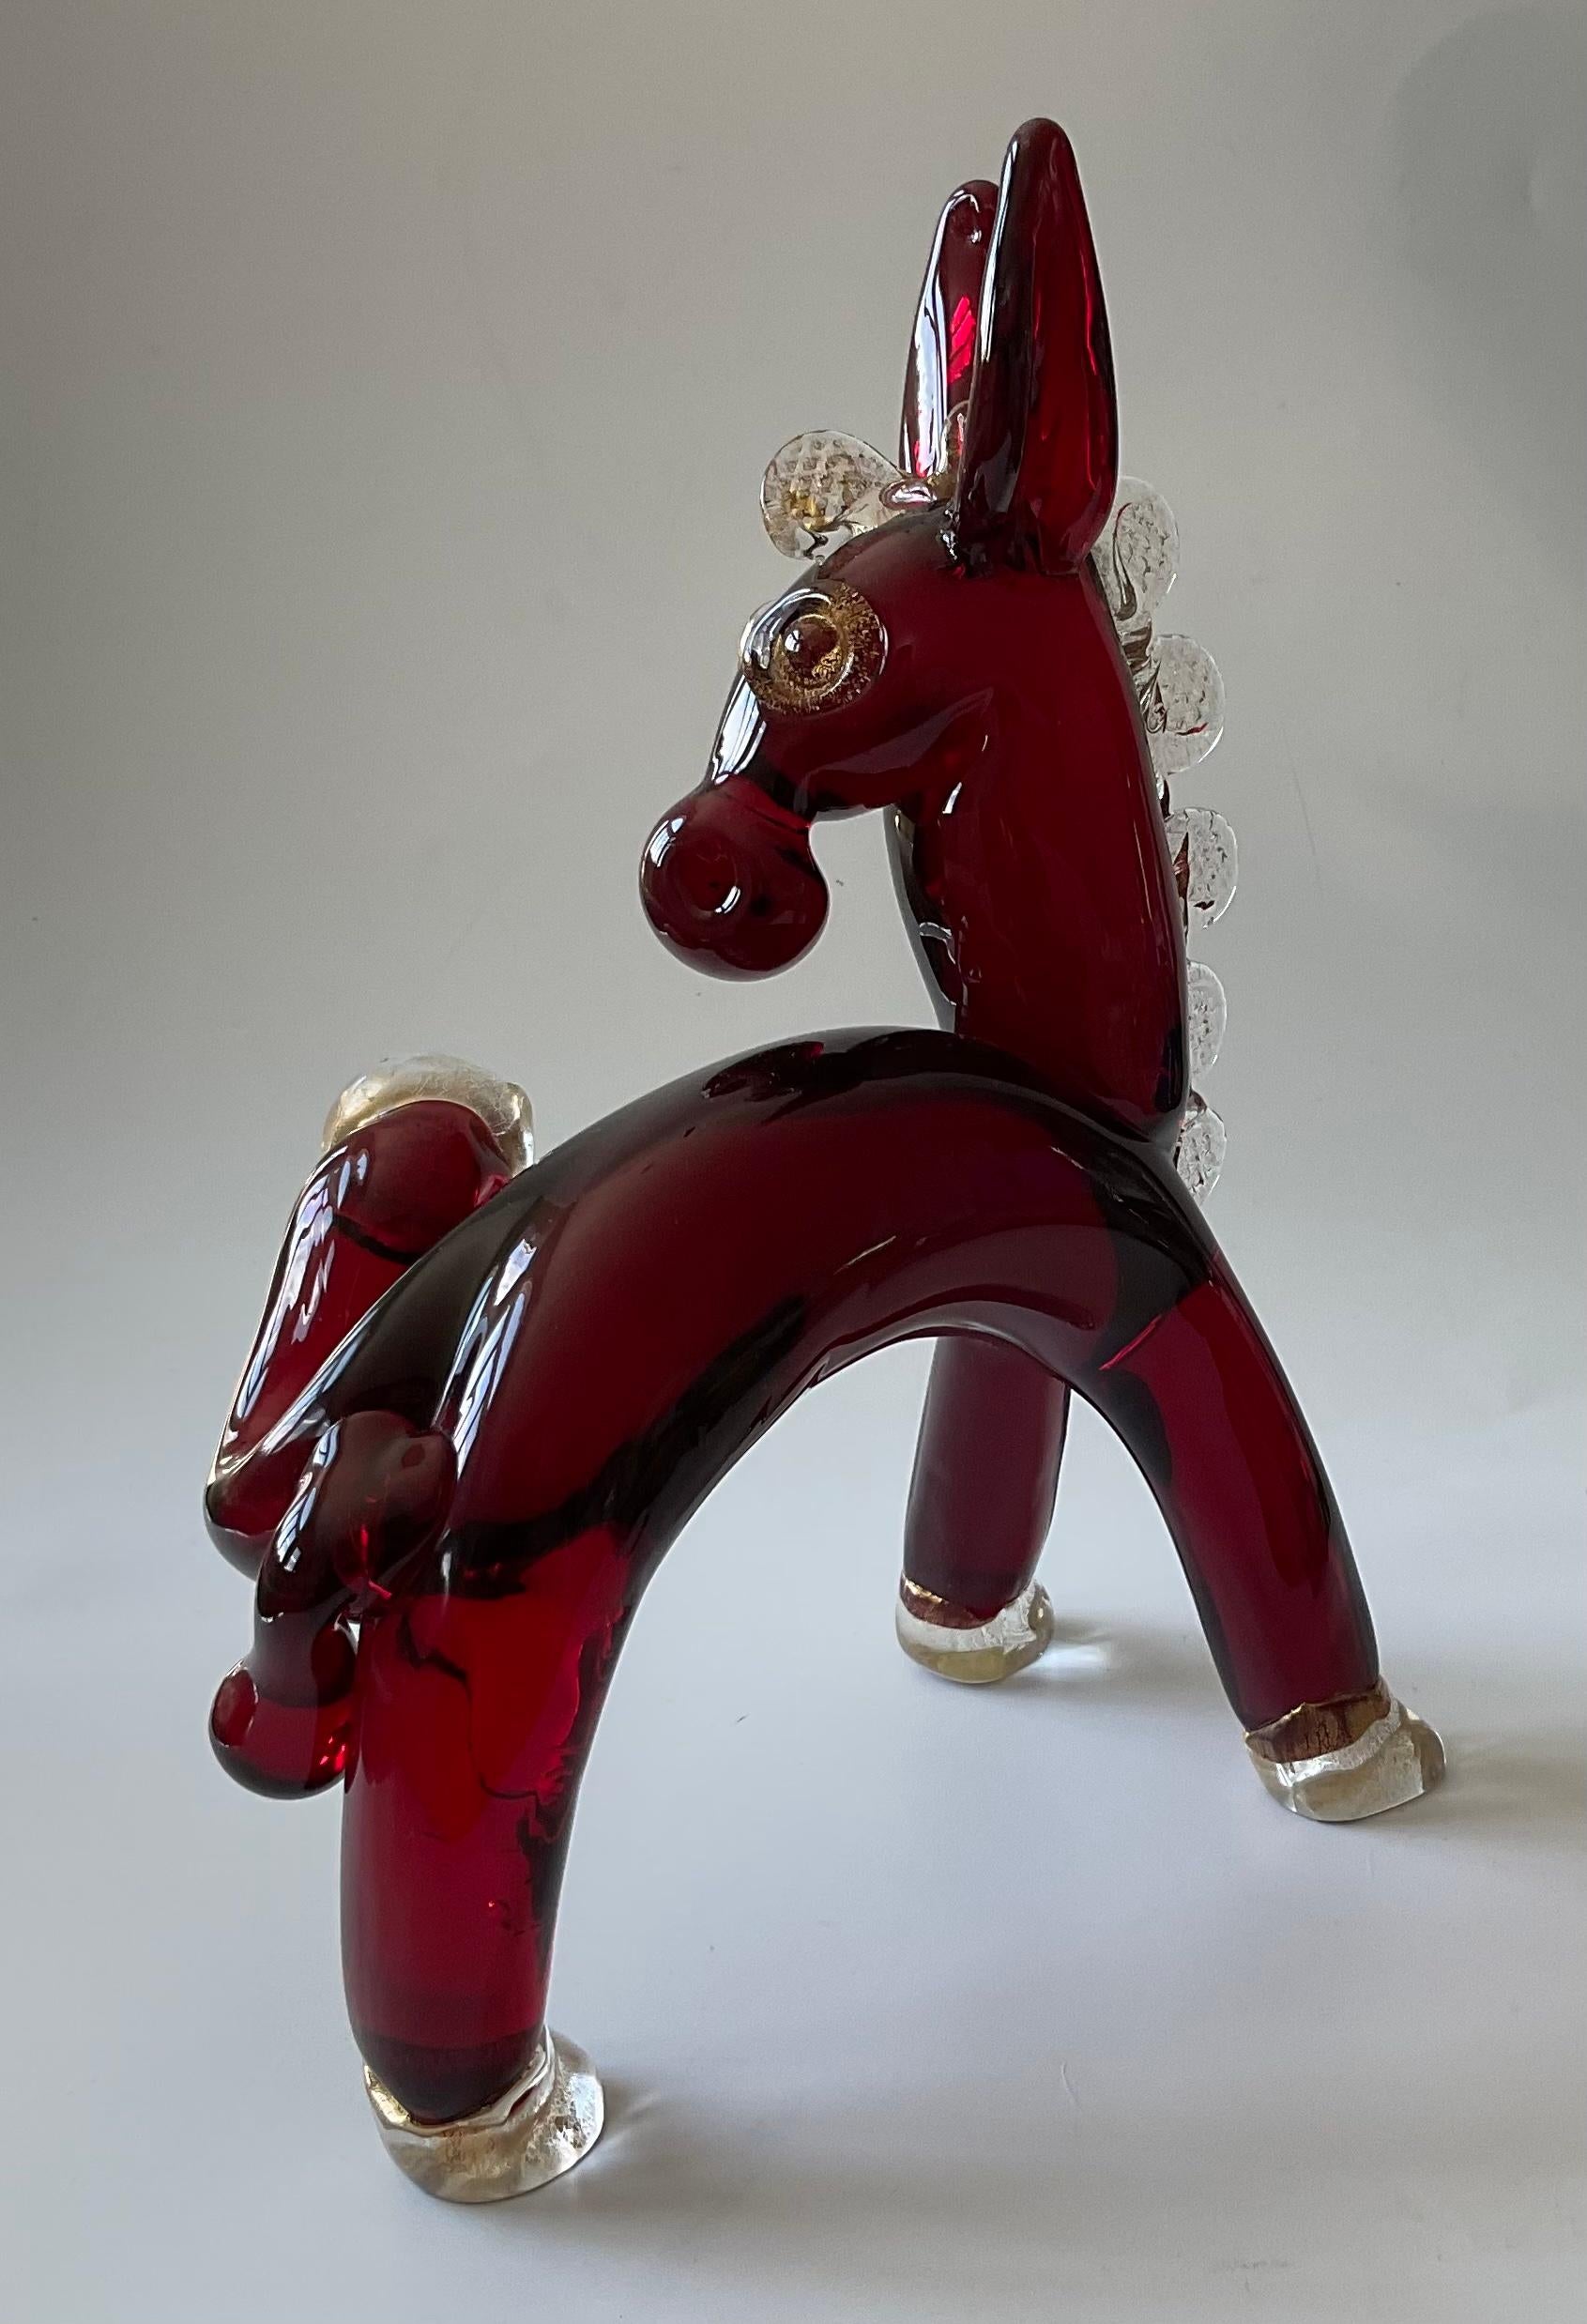 Ercole Barovier for Barovier and Toso Rare Murano glass Sculpture of a Donkey in vibrant red with gold applied accents. The leg is up. Rare art deco sculpture. 

The nearly fifty year tenure of Ercole Barovier as artistic director, designer and